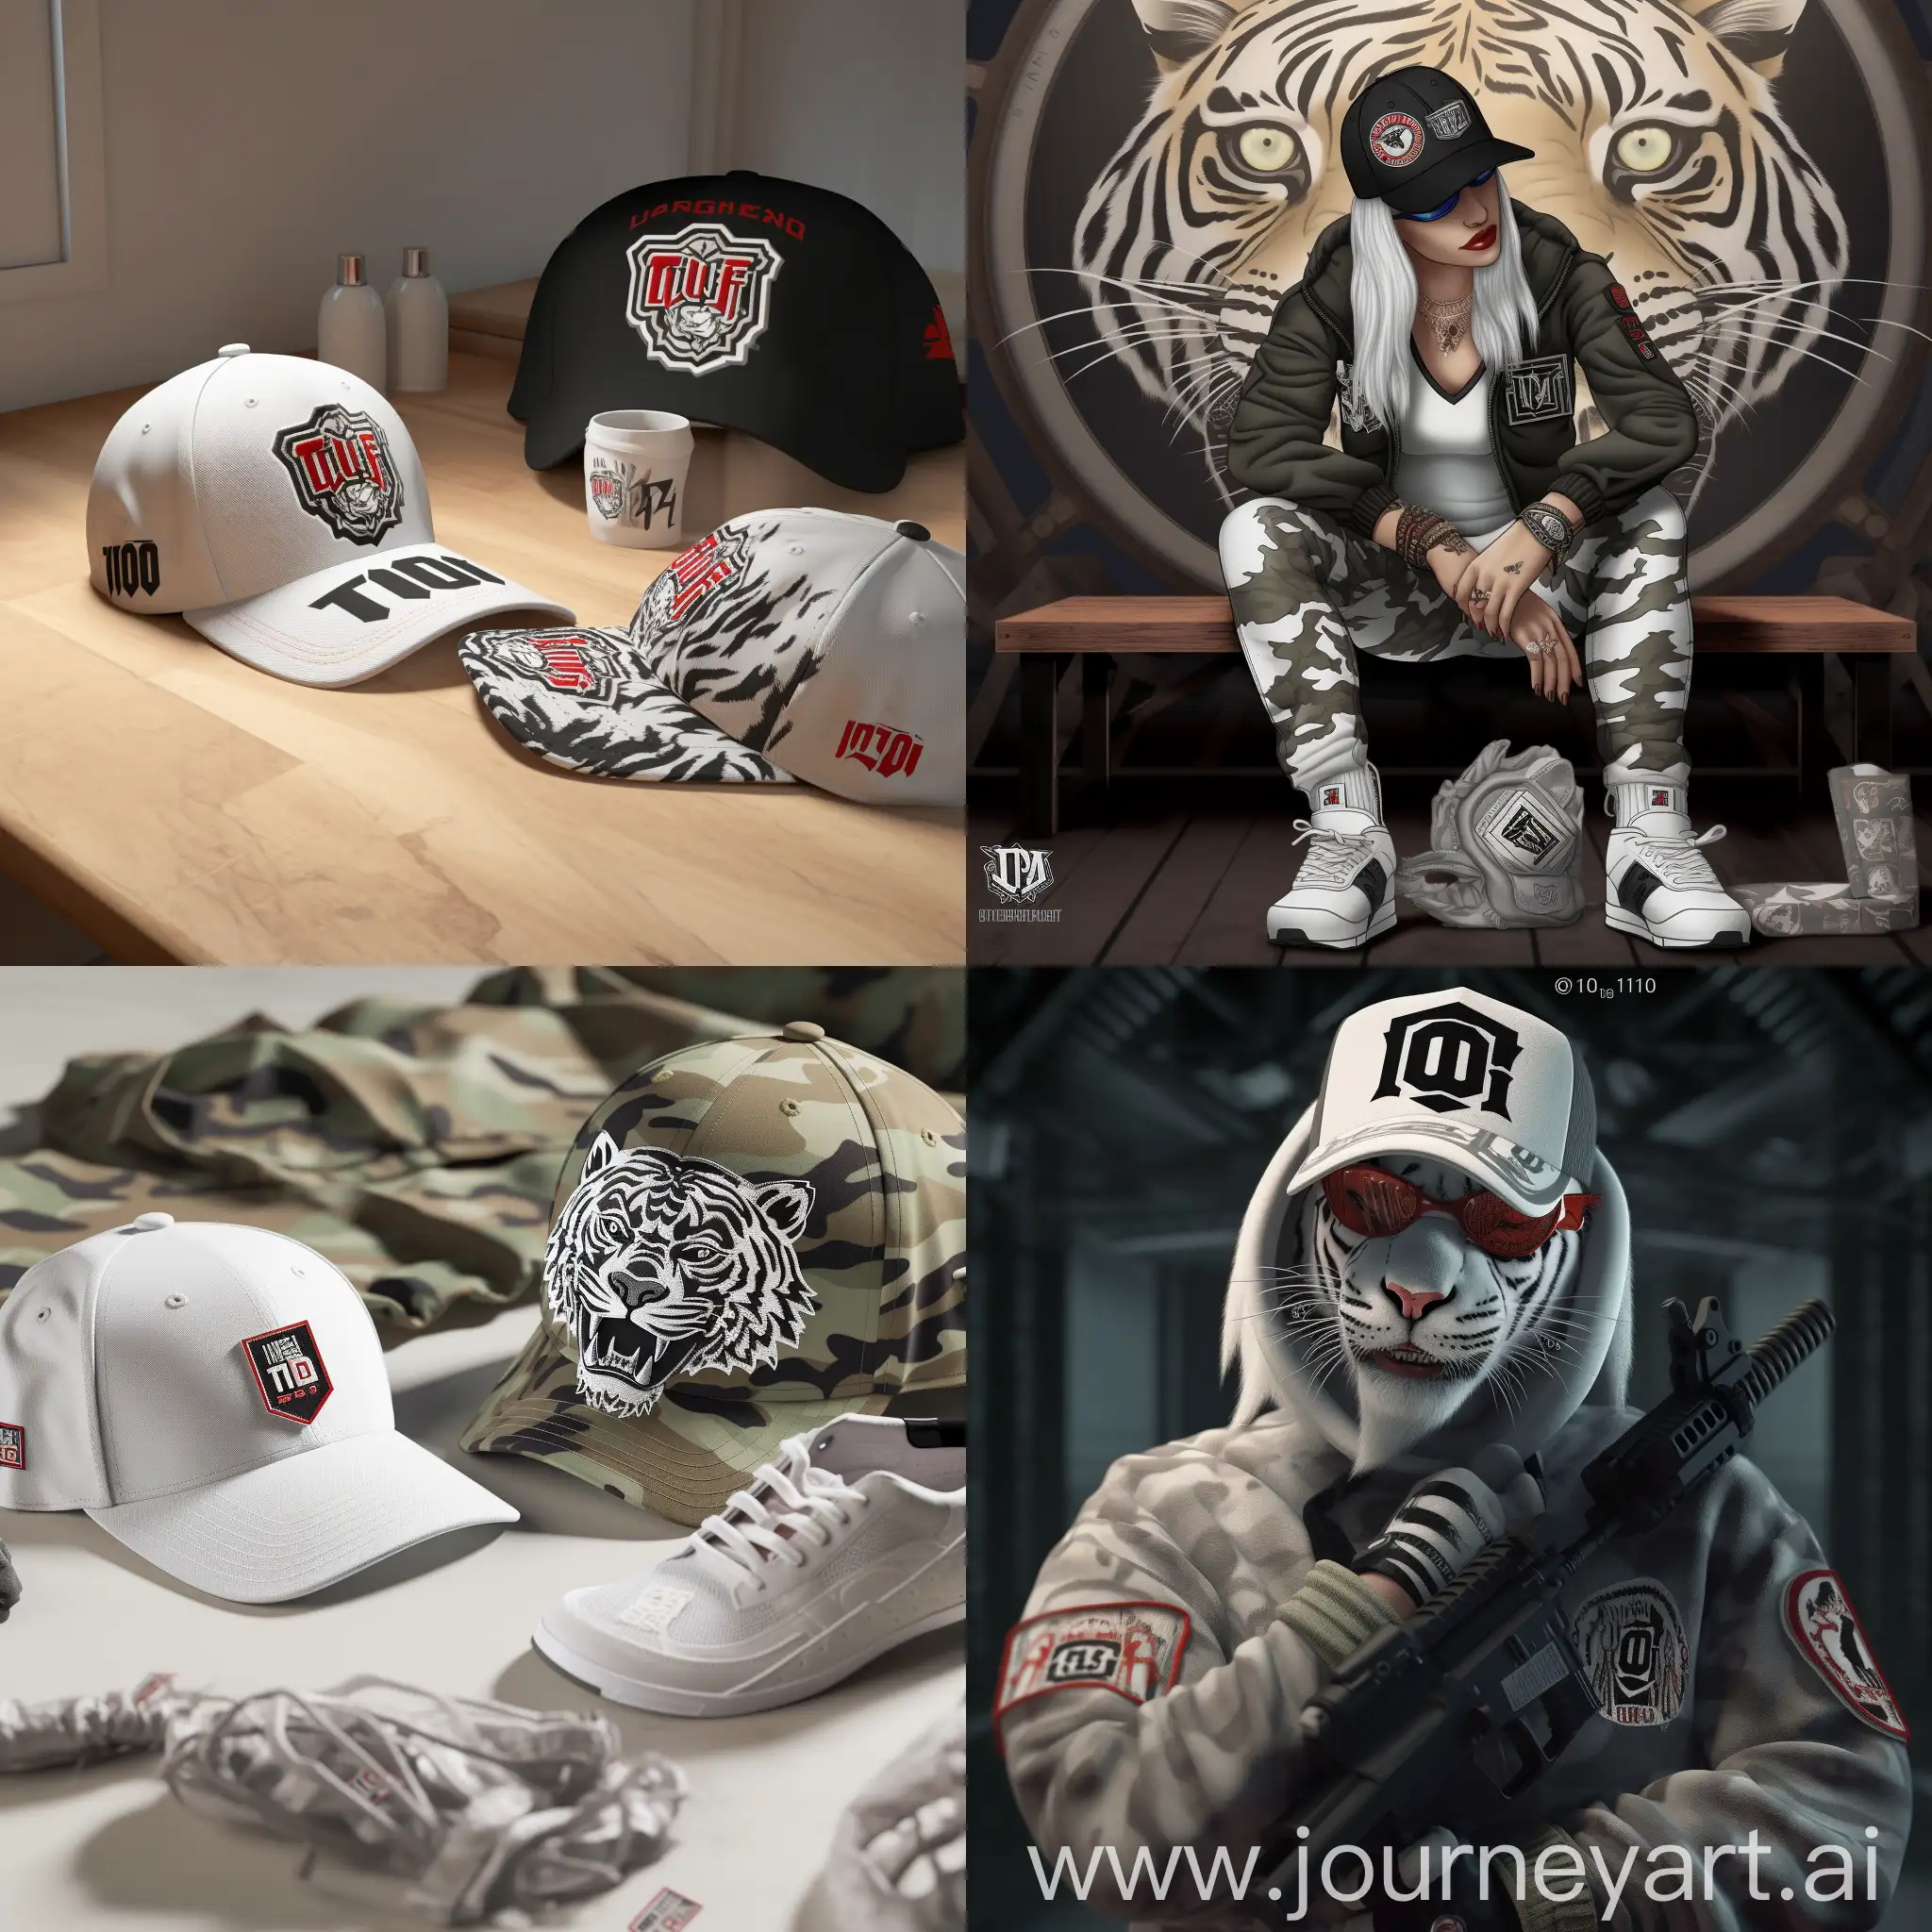 Render a 3D Pixar-style depiction of a robust ghetto/gangster white tiger adorned in an I.O.T logo baseball cap and white tiger camo army attire, featuring a British flag patch on the arm and a name chain emblazoned with "T1G3R689". Positioned before a military tank branded with "I.O.T", the tiger exudes confidence and strength. The scene is infused with dynamic energy reminiscent of Pixar's animation style, with vibrant colors and lively textures. The tiger's expression is determined yet playful, illuminated by warm, soft lighting evoking a sense of camaraderie. --v 5 --stylize 1000